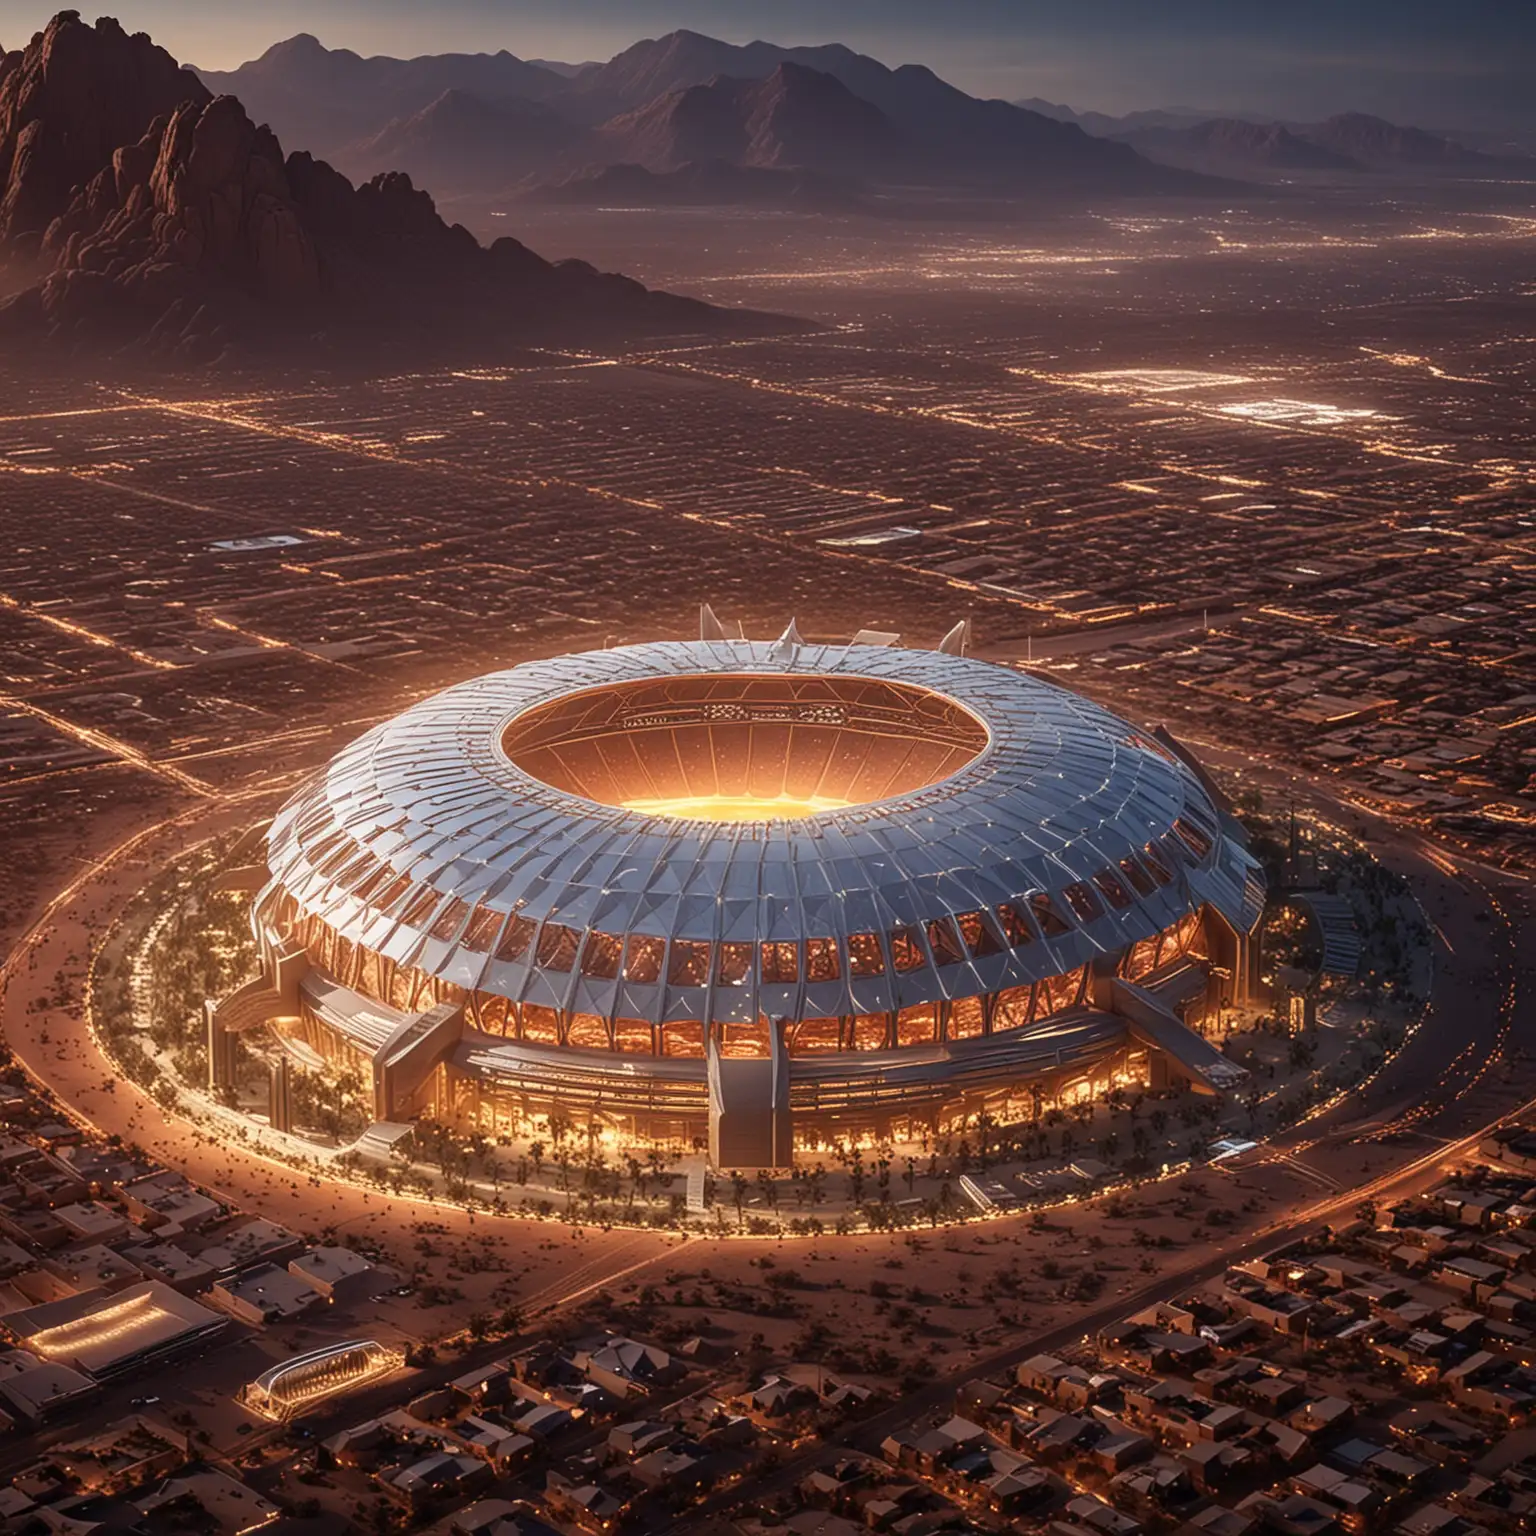 A mystical futuristic design of a football stadium in the desert, it should have a beautiful glowing Phoenix on top of the dome, some other creative ideas, from a distance we should see the city of phoenix with all its buildings and camelback mountain